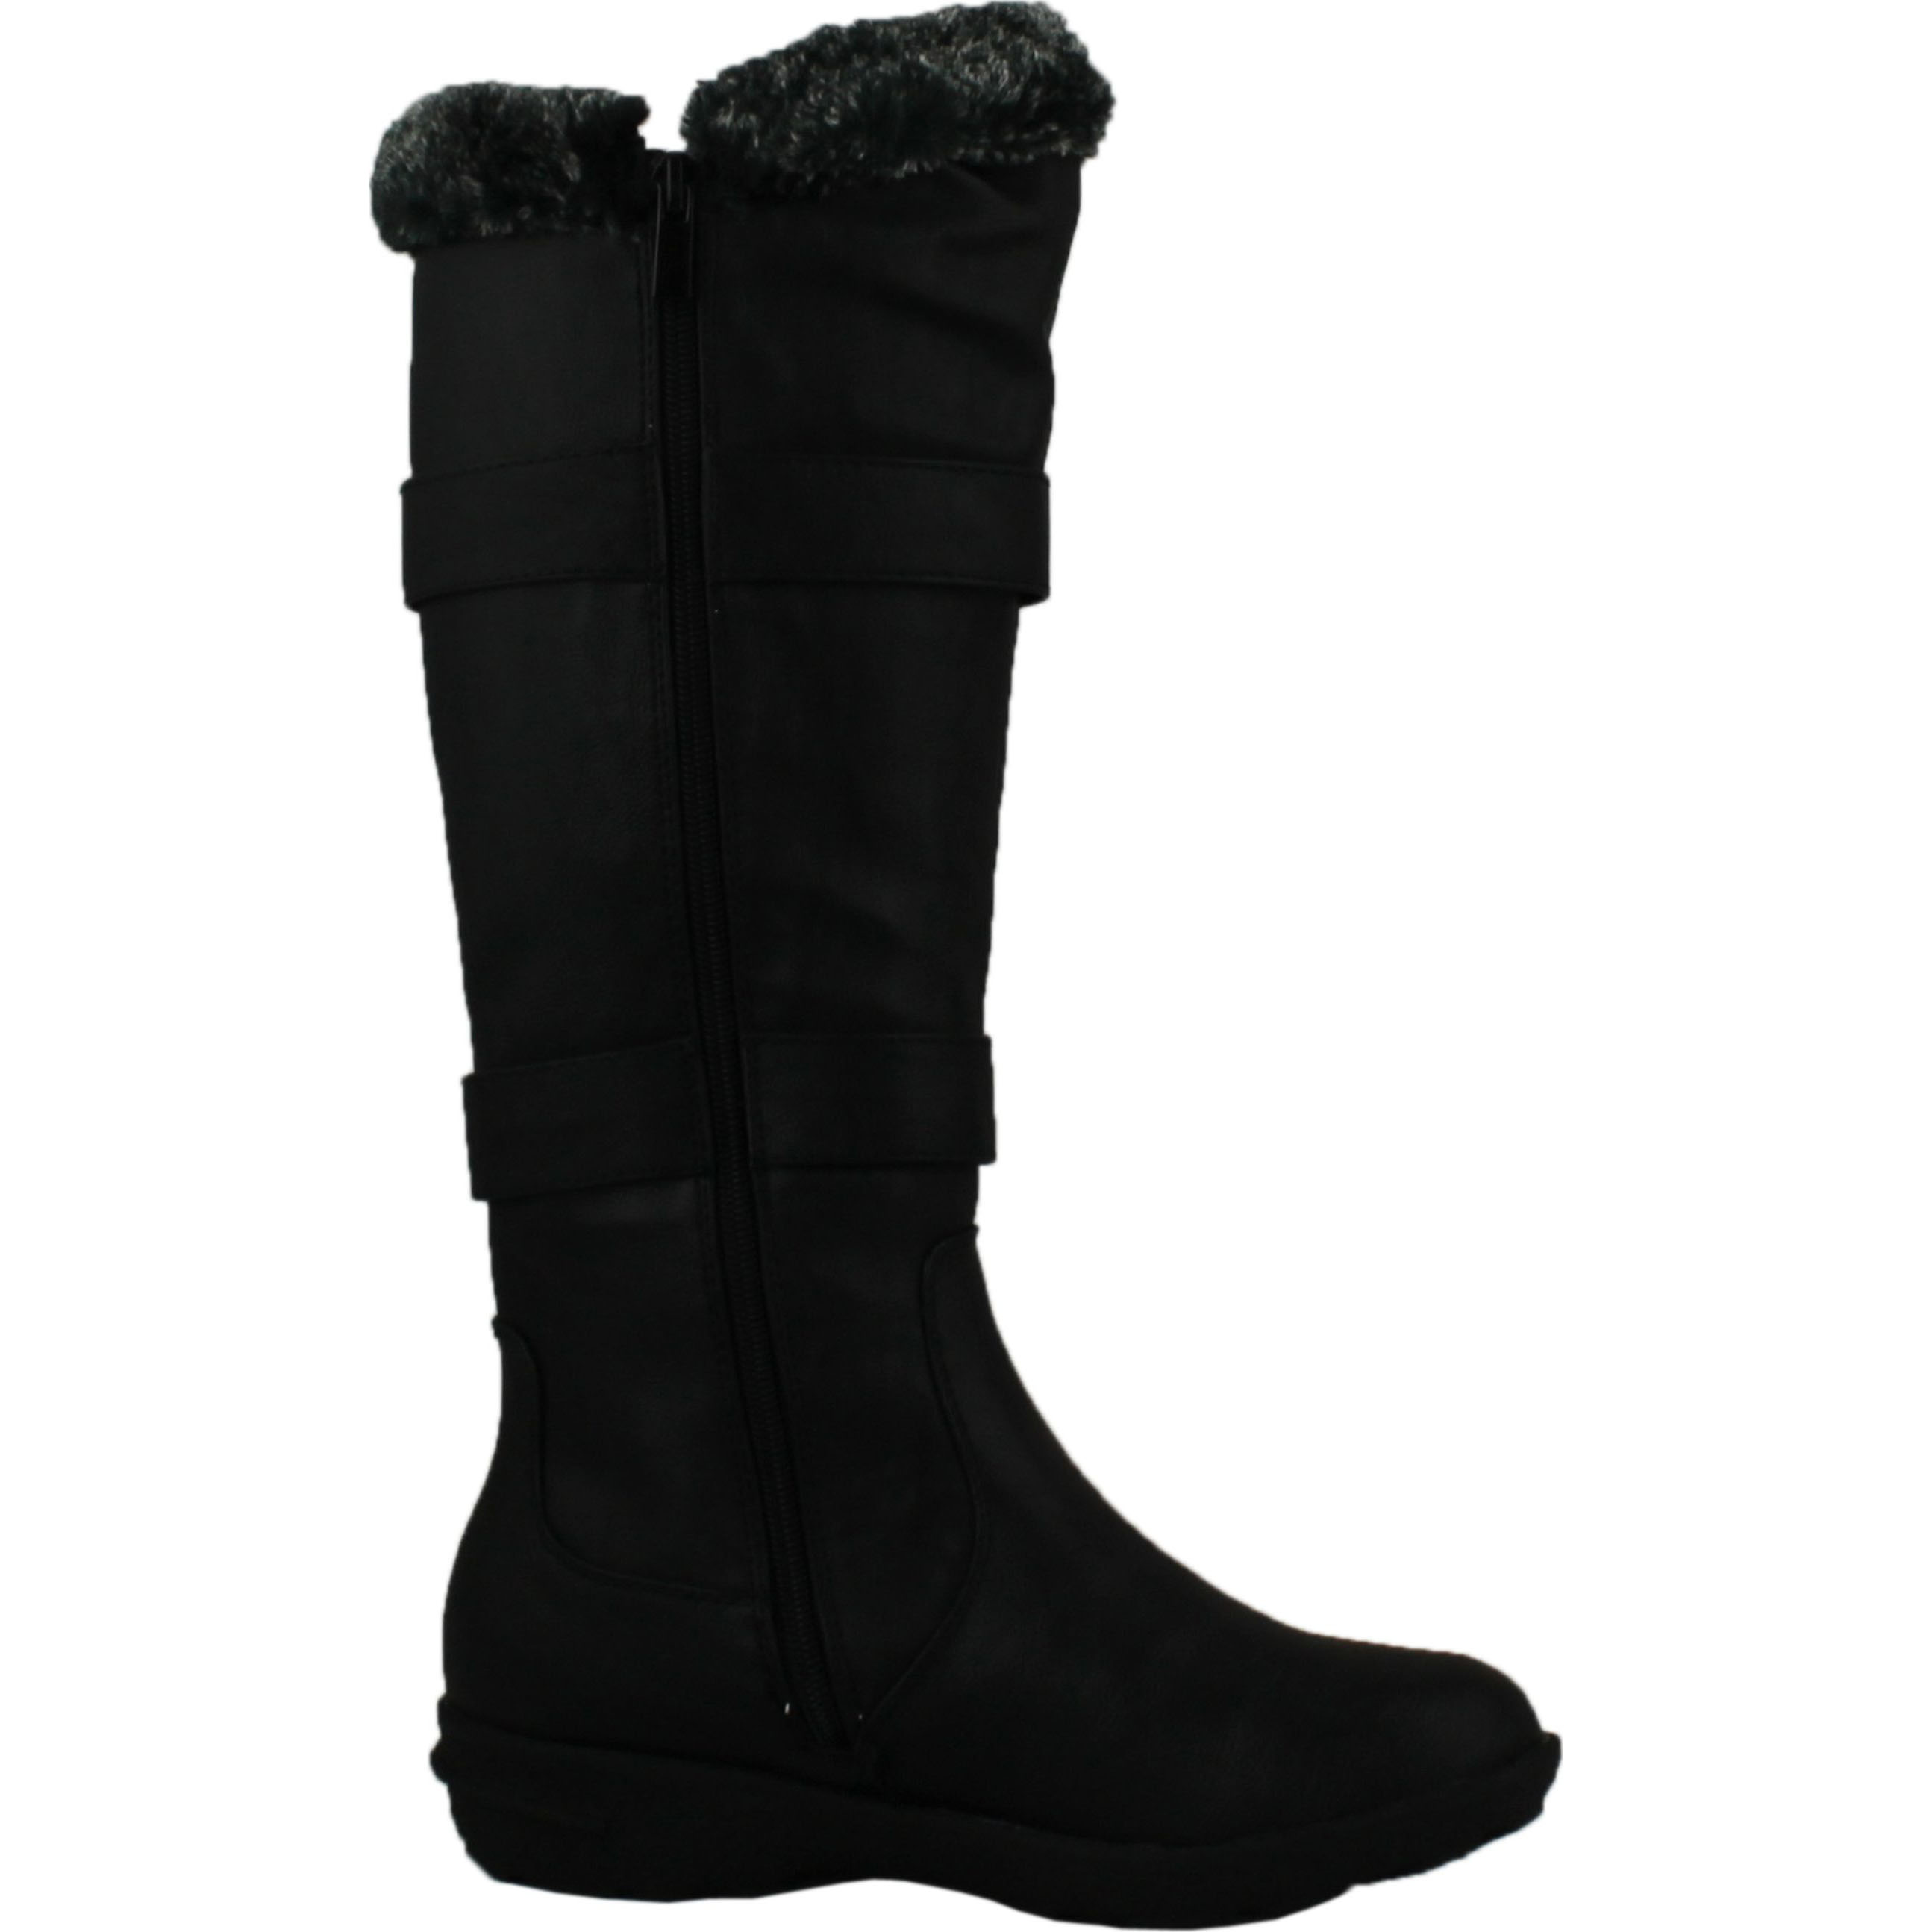 FOREVER AURA-43 Womens Double Straps Knee High Boots Winter Boots - image 2 of 4